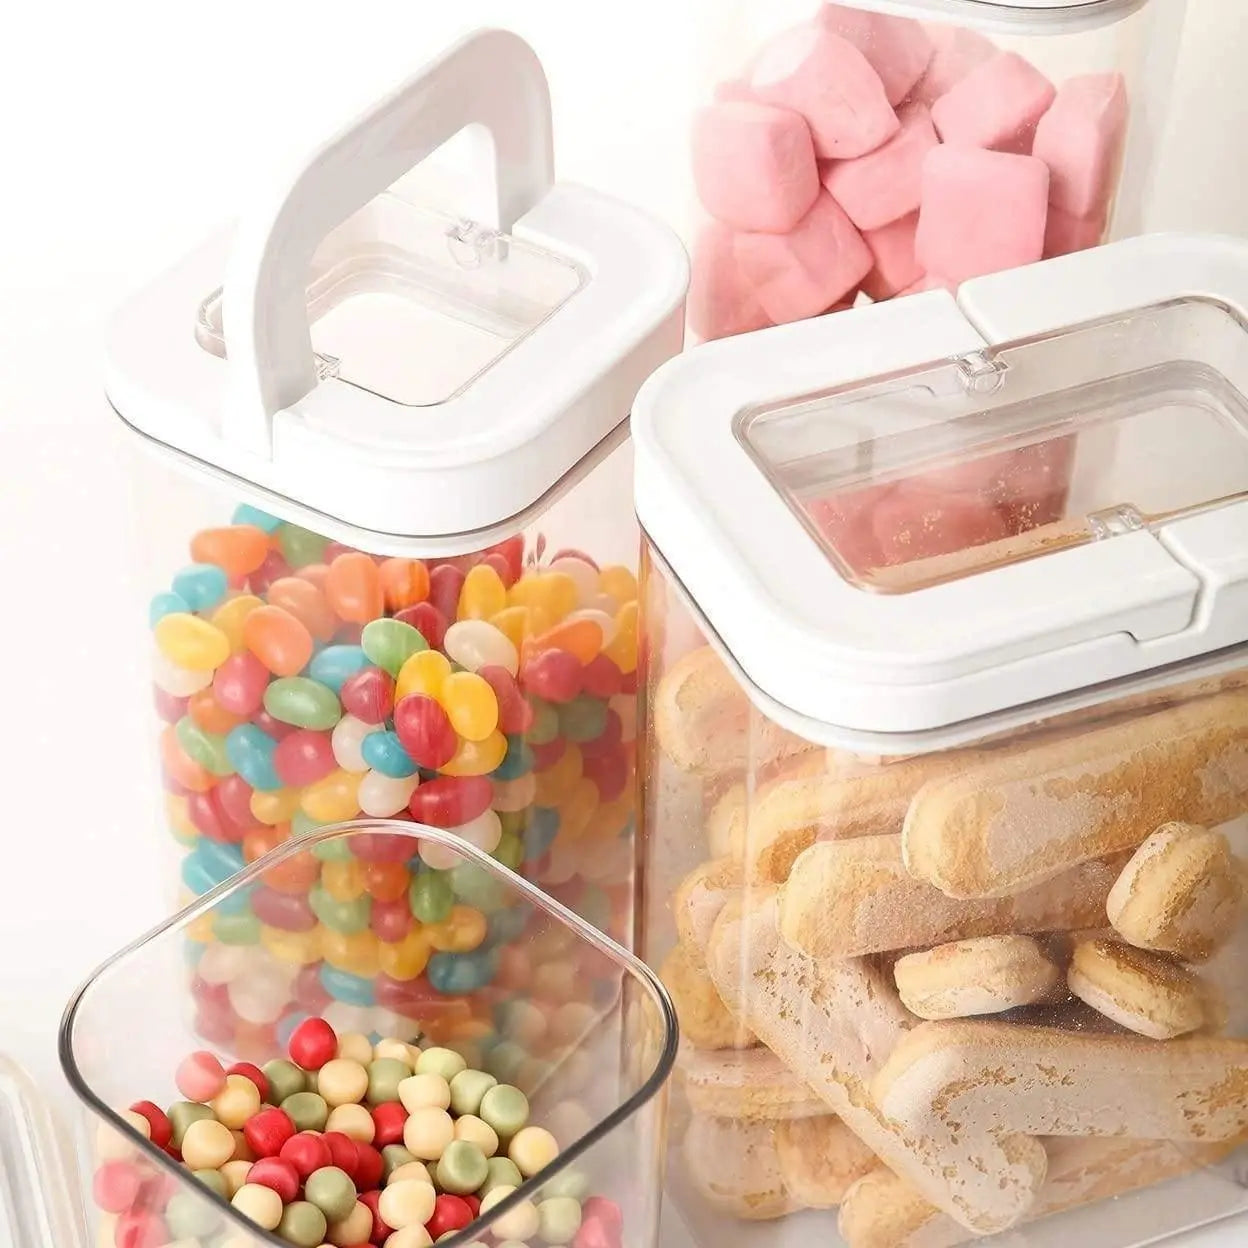 Wholesale prices with free shipping all over United States Member's Mark Fliplock Containers Set 8 Pcs. - Steven Deals